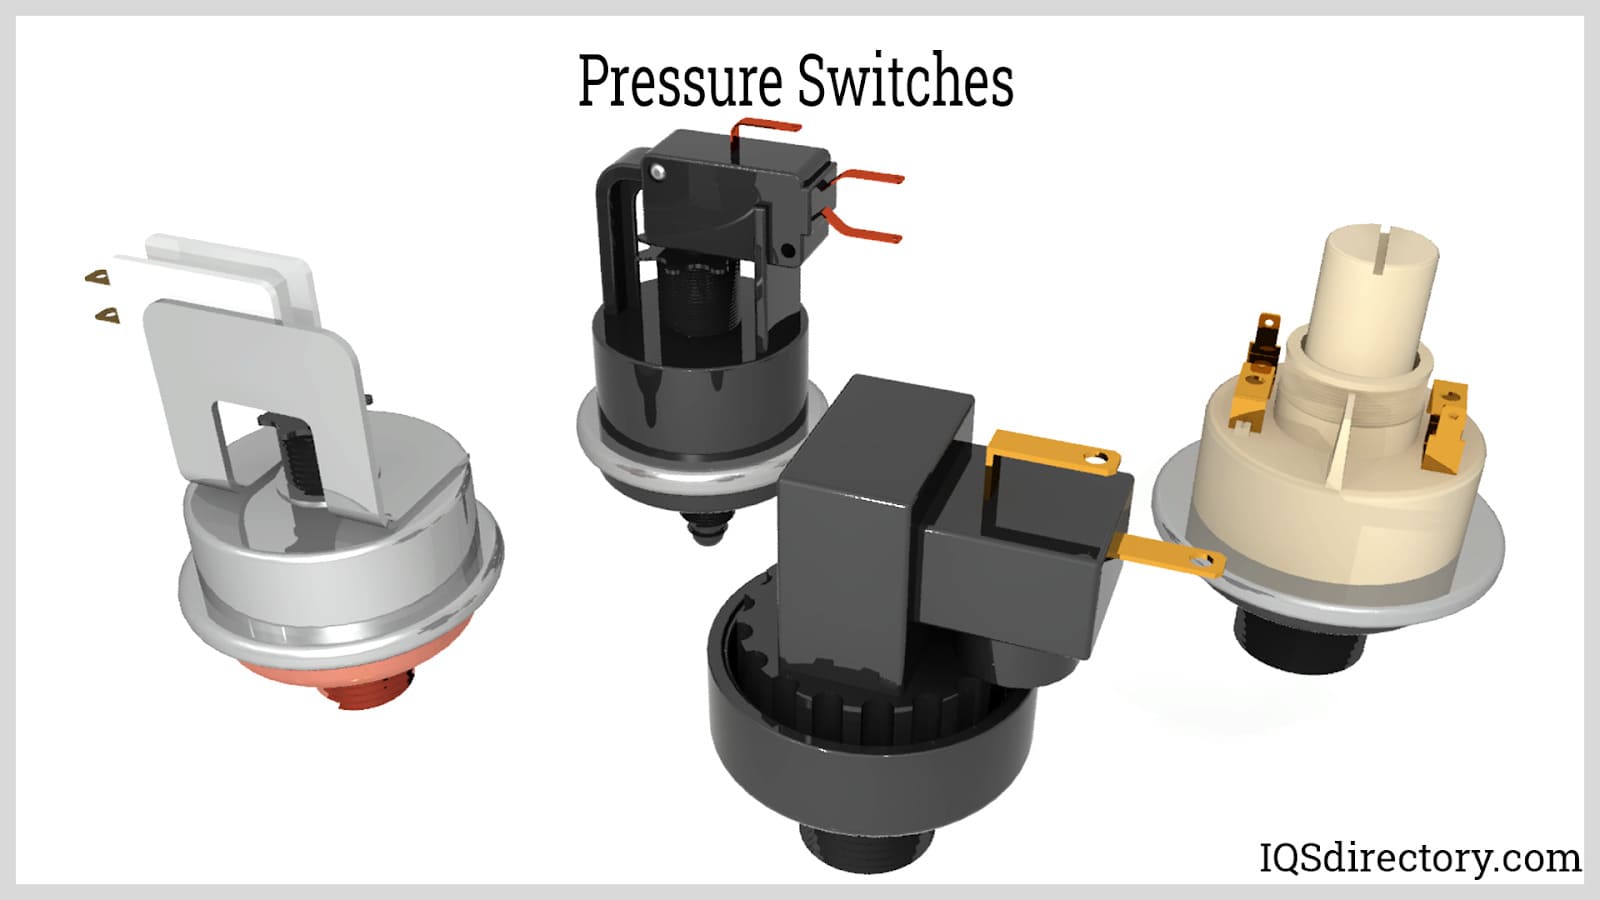 Variable PressureWith its variable pressure system, you can